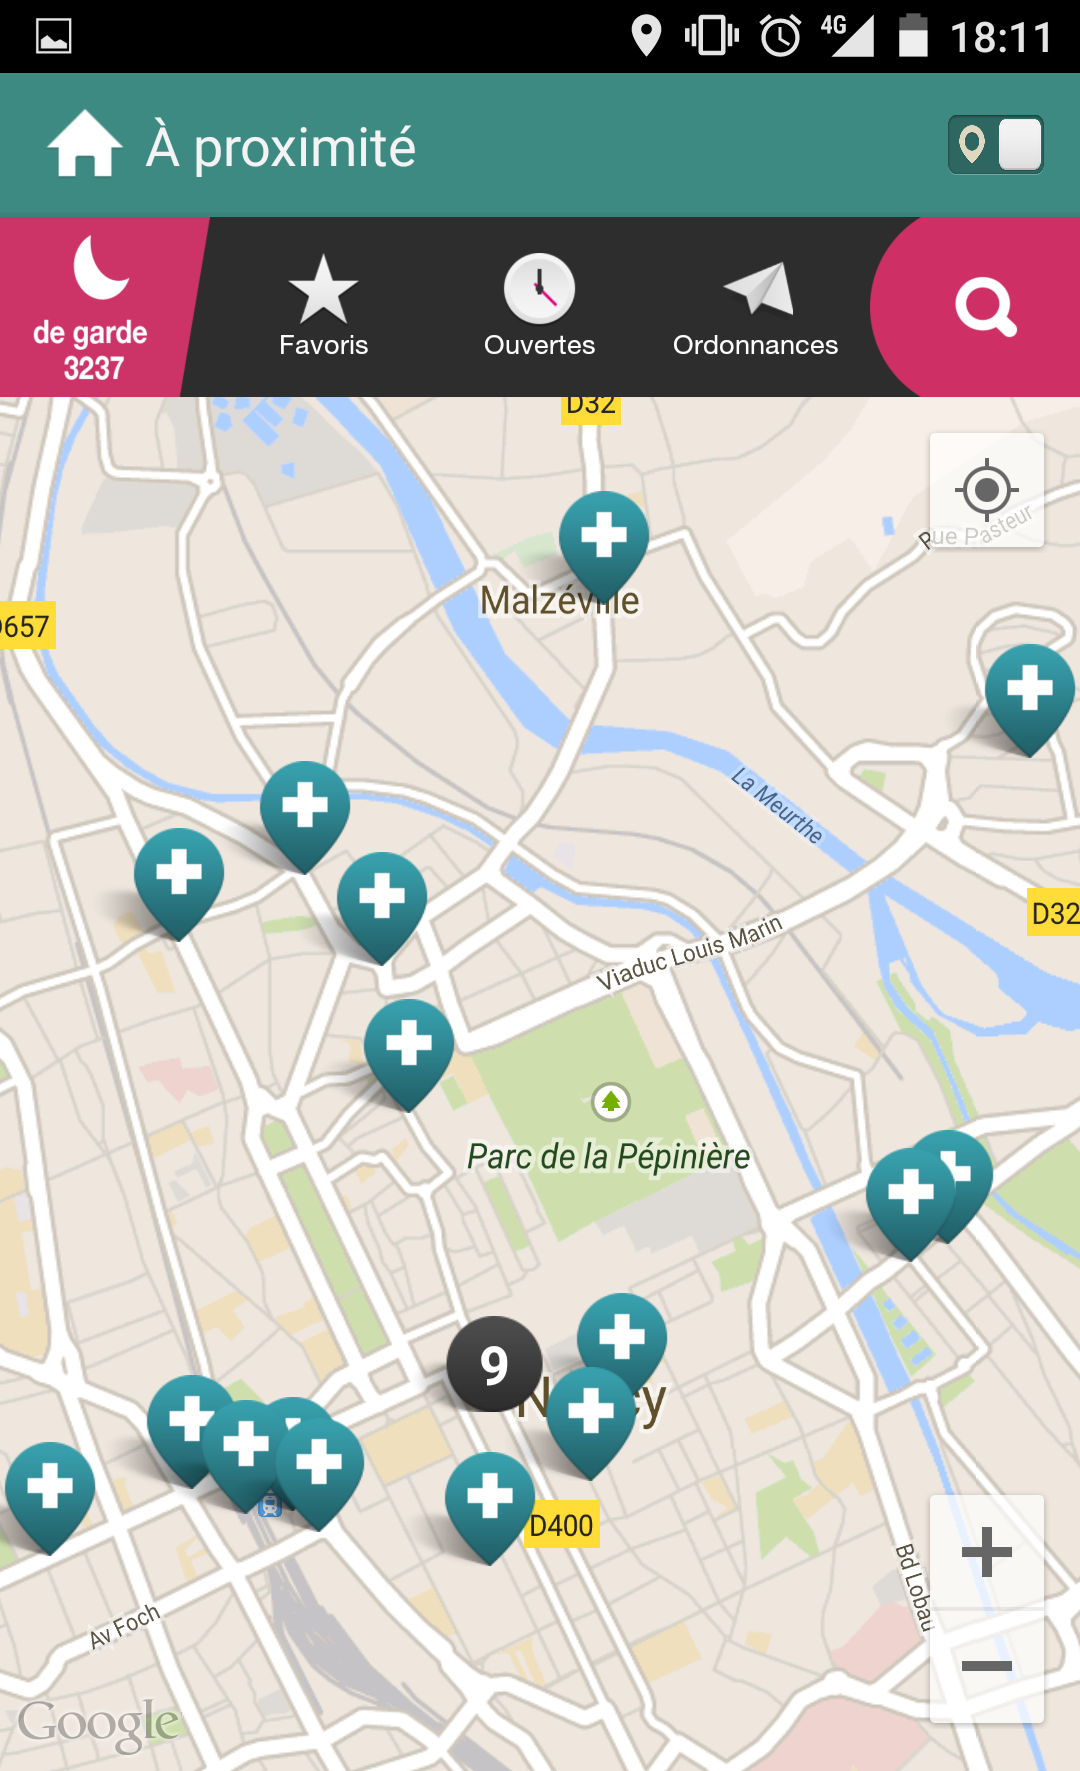 Android application Ma Pharmacie Mobile screenshort